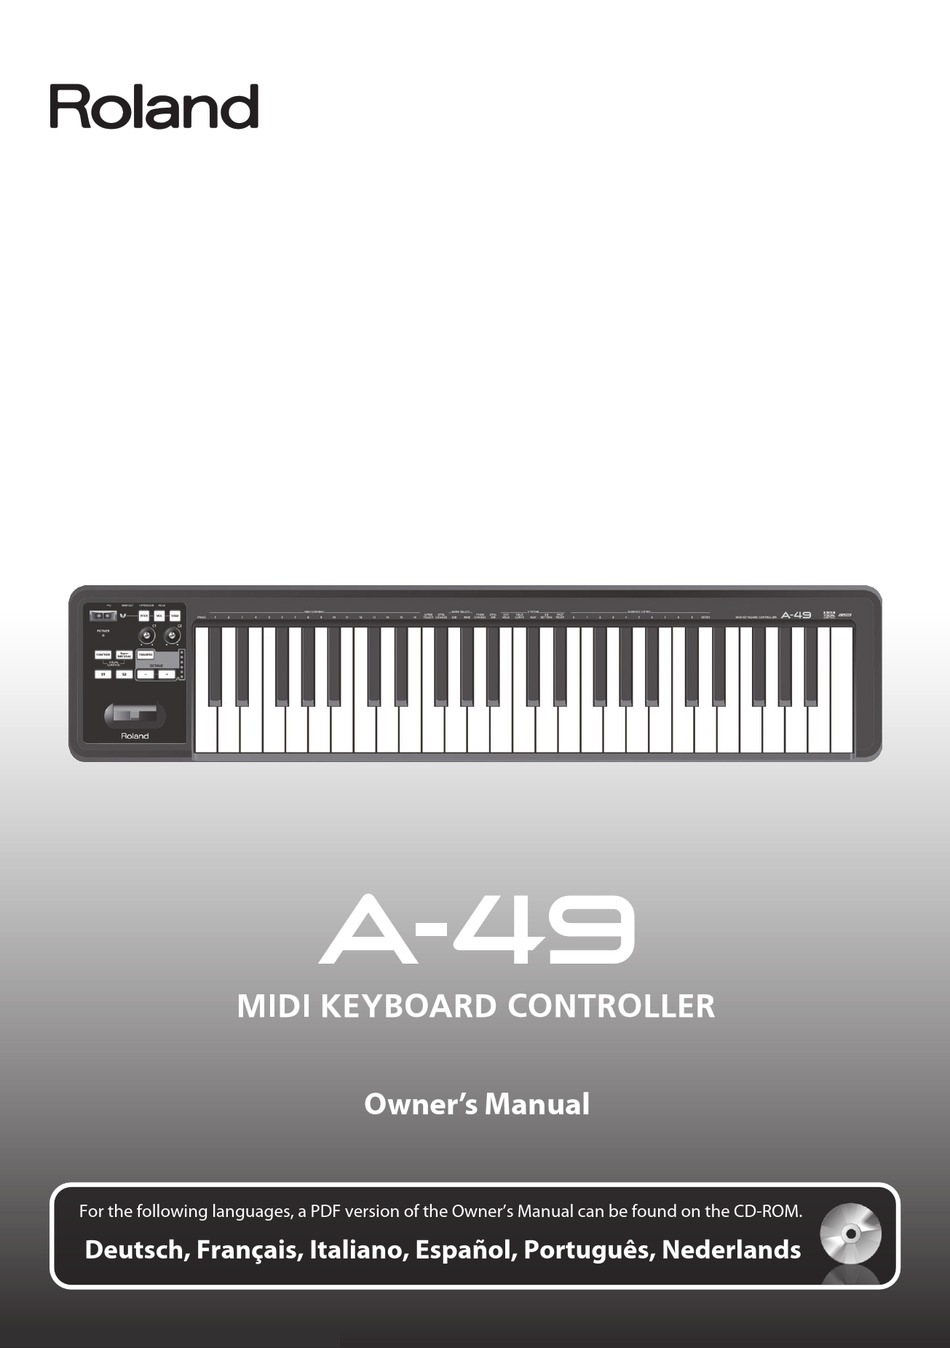 roland a-49 driver for mac